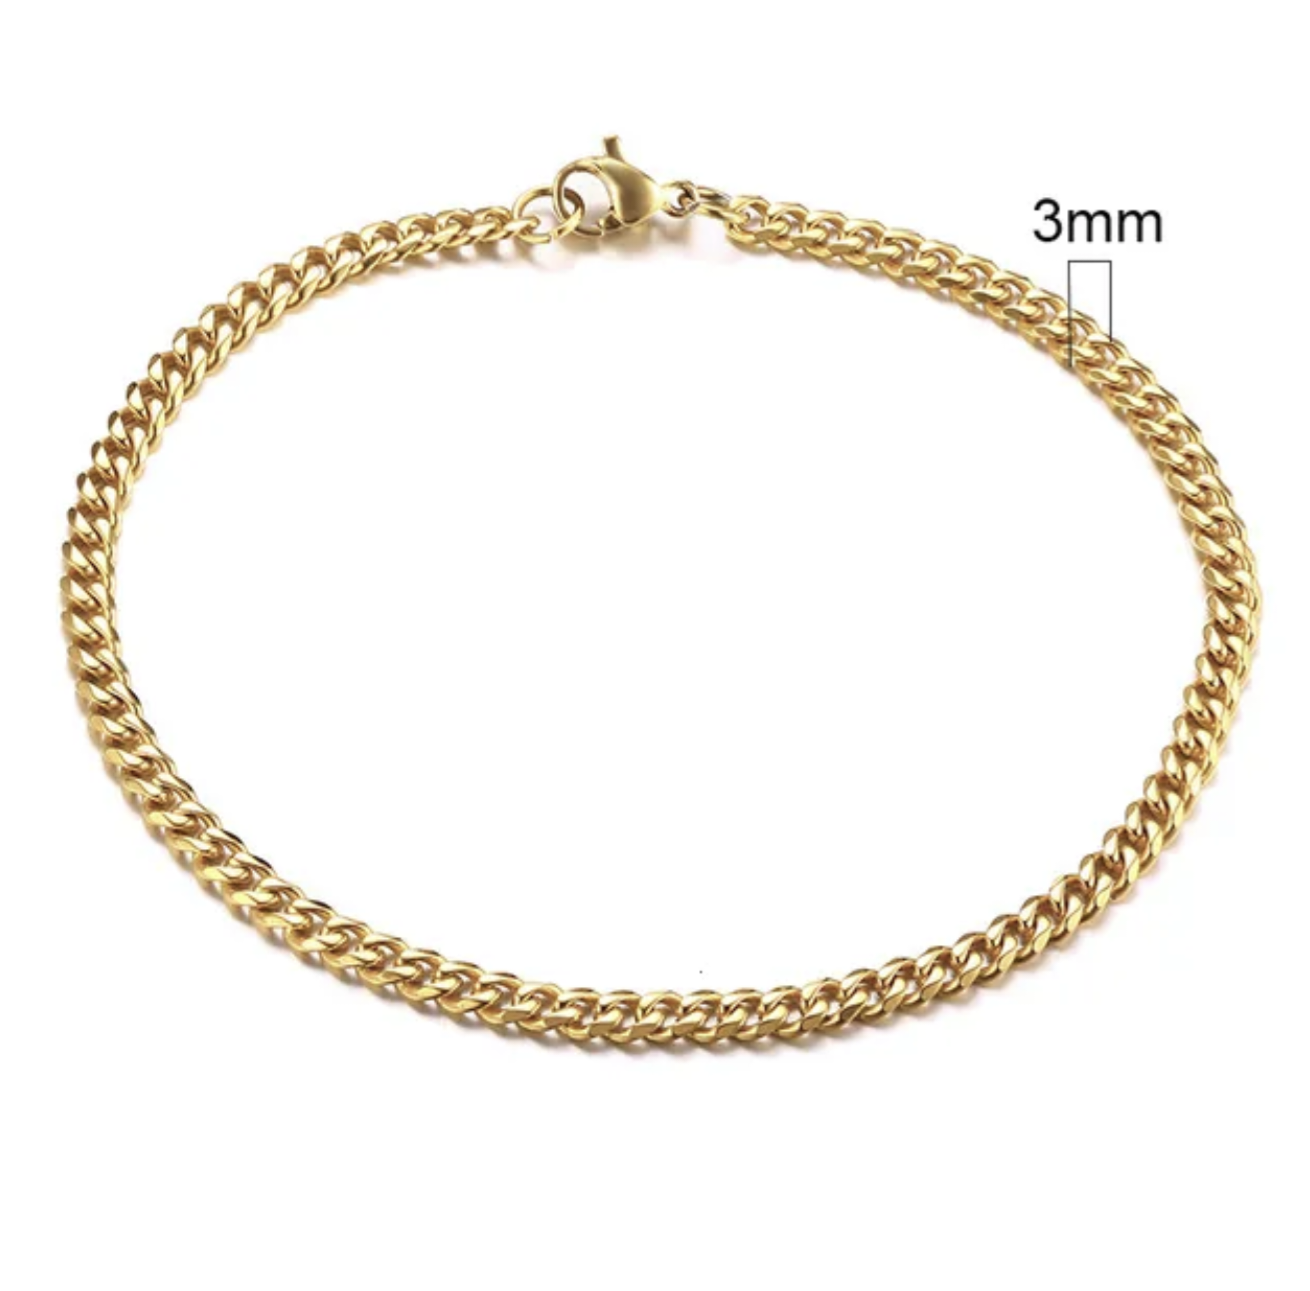 LIYANNAH - Cuban Chain Link Stainless Steel Bracelet - 3mm / 5mm / 7mm -  Jewellery Everyday Essentials - Womens Gifts - For Her